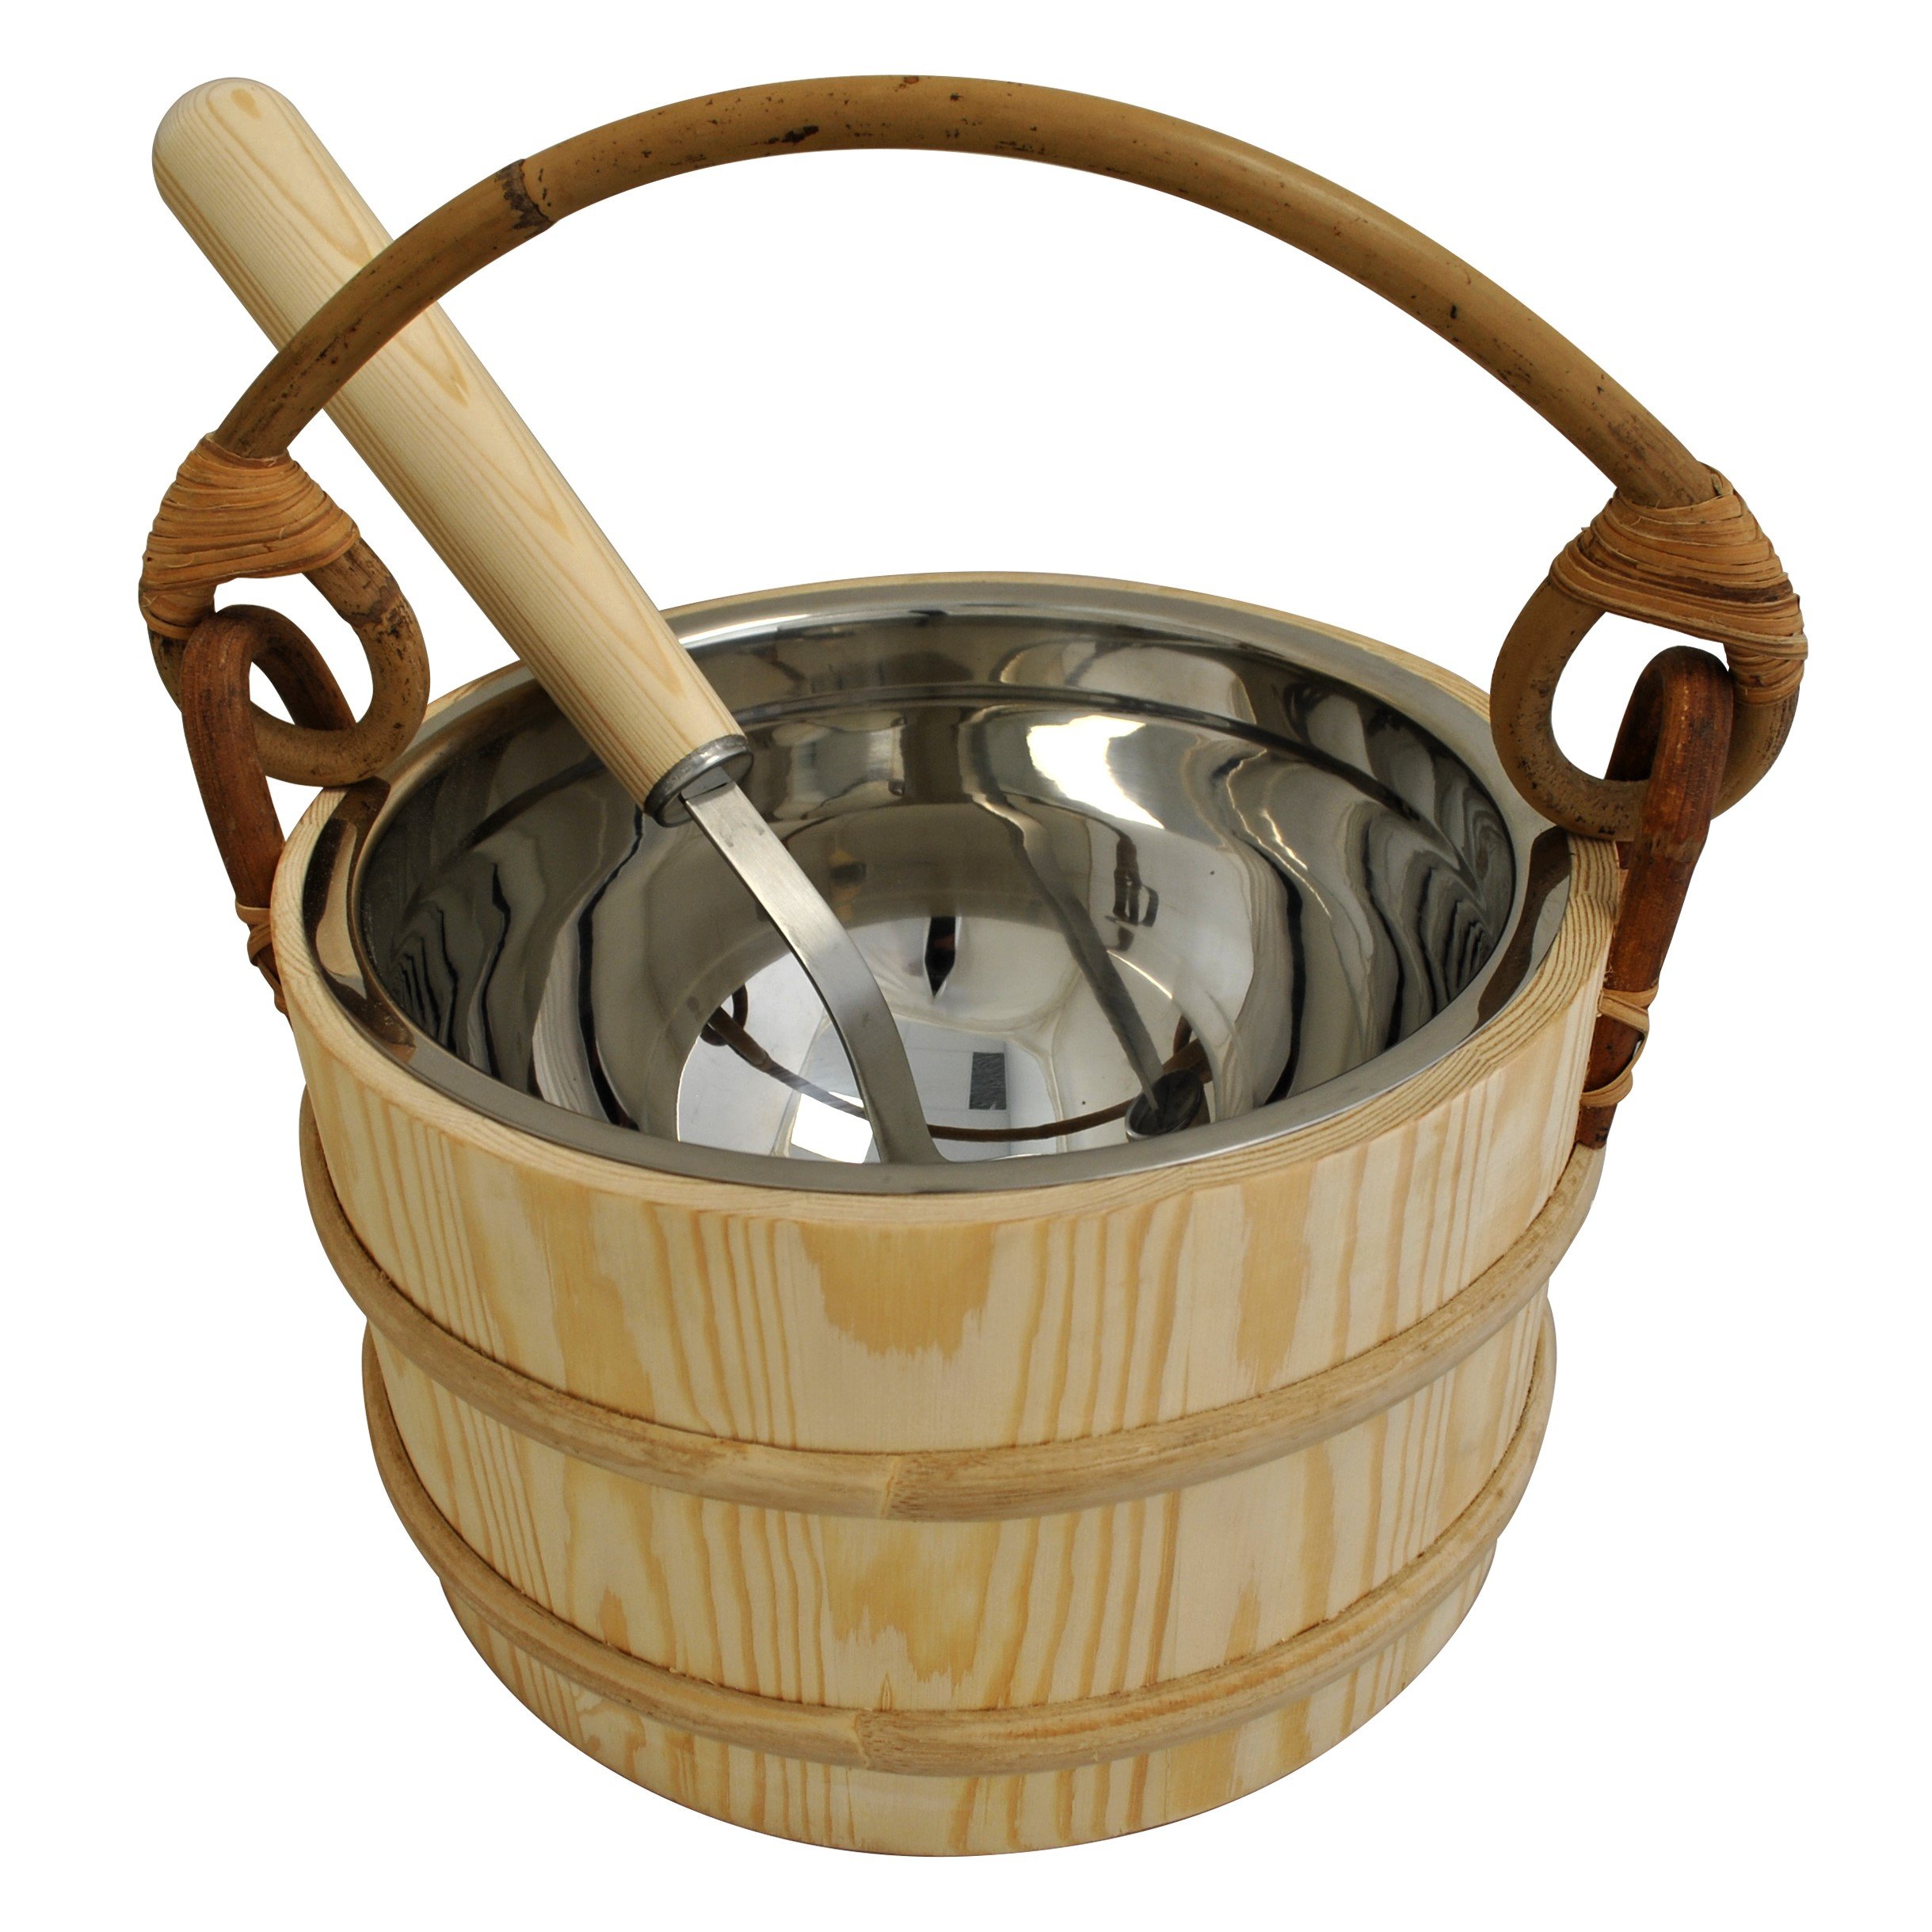 Pine Sauna Bucket with Stainless Steel Ladle & Liner